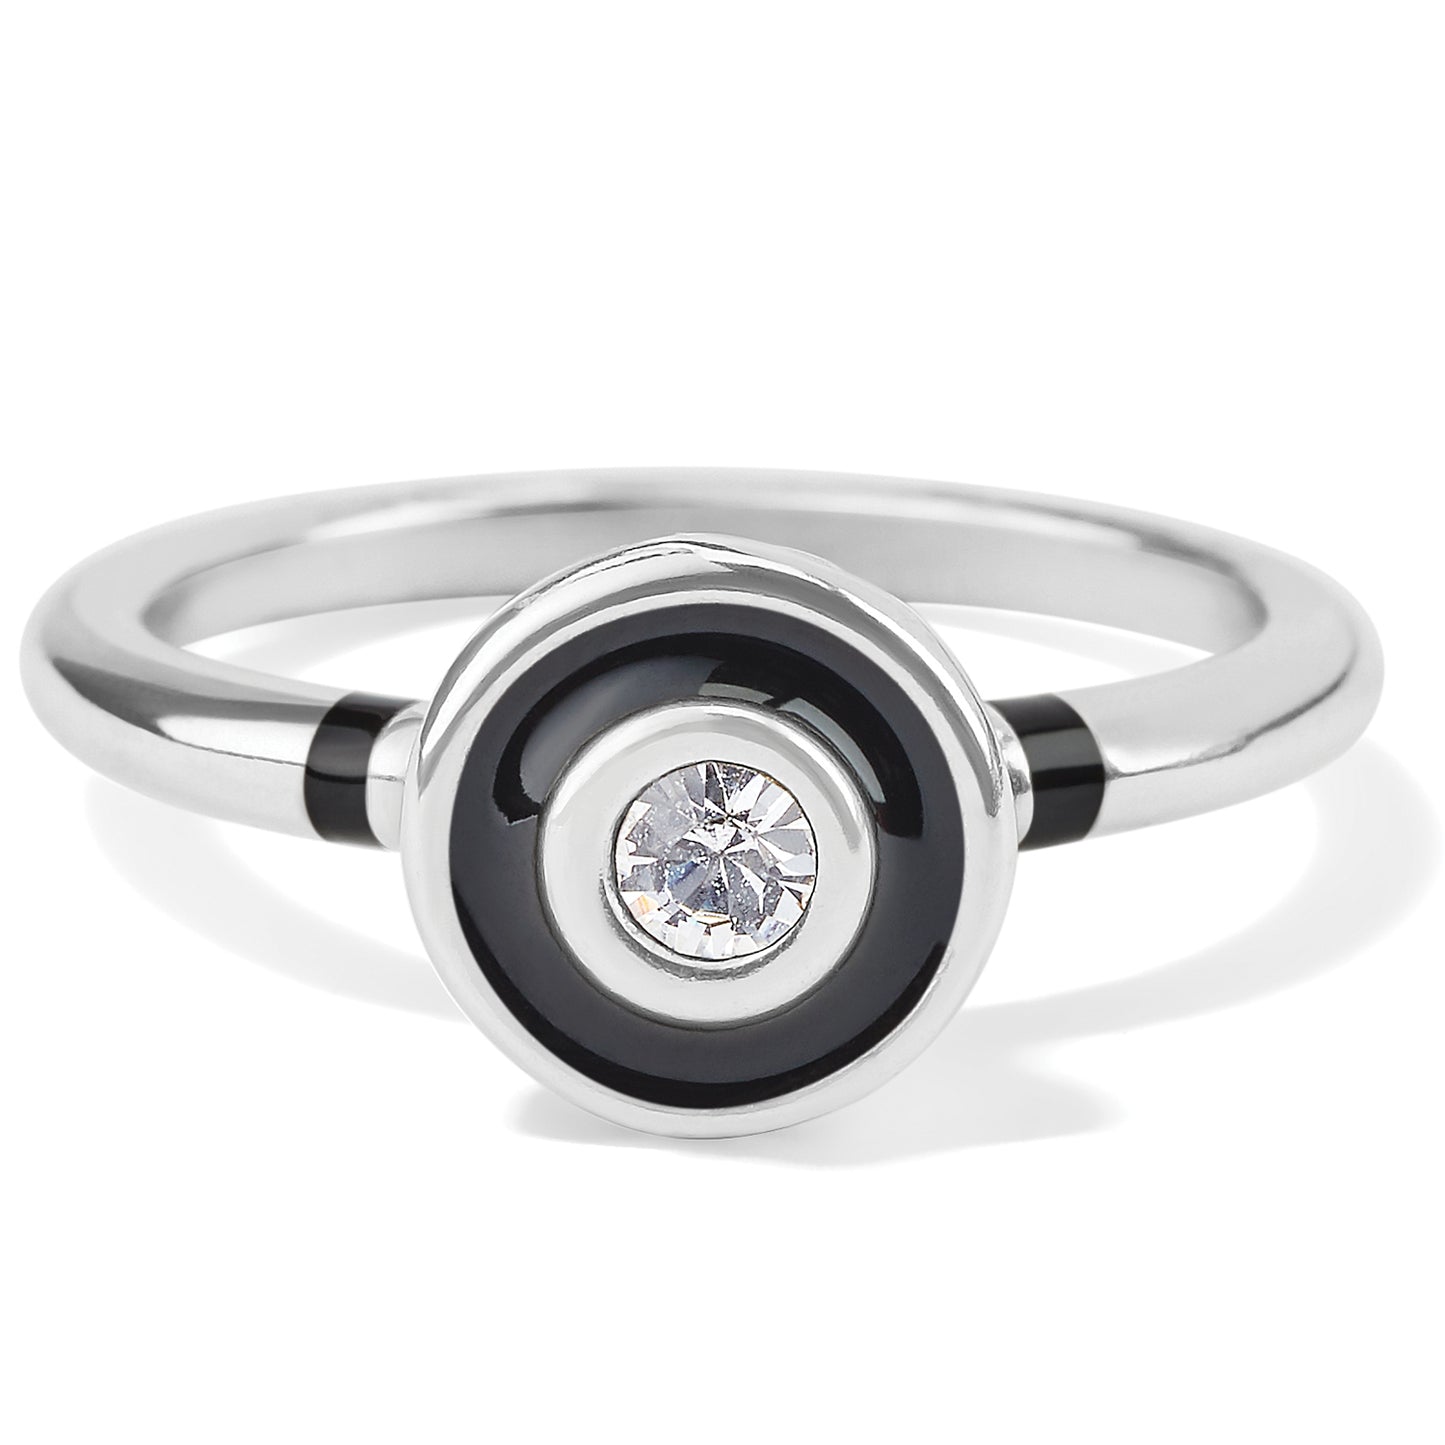 Meridian Eclipse Ring 8